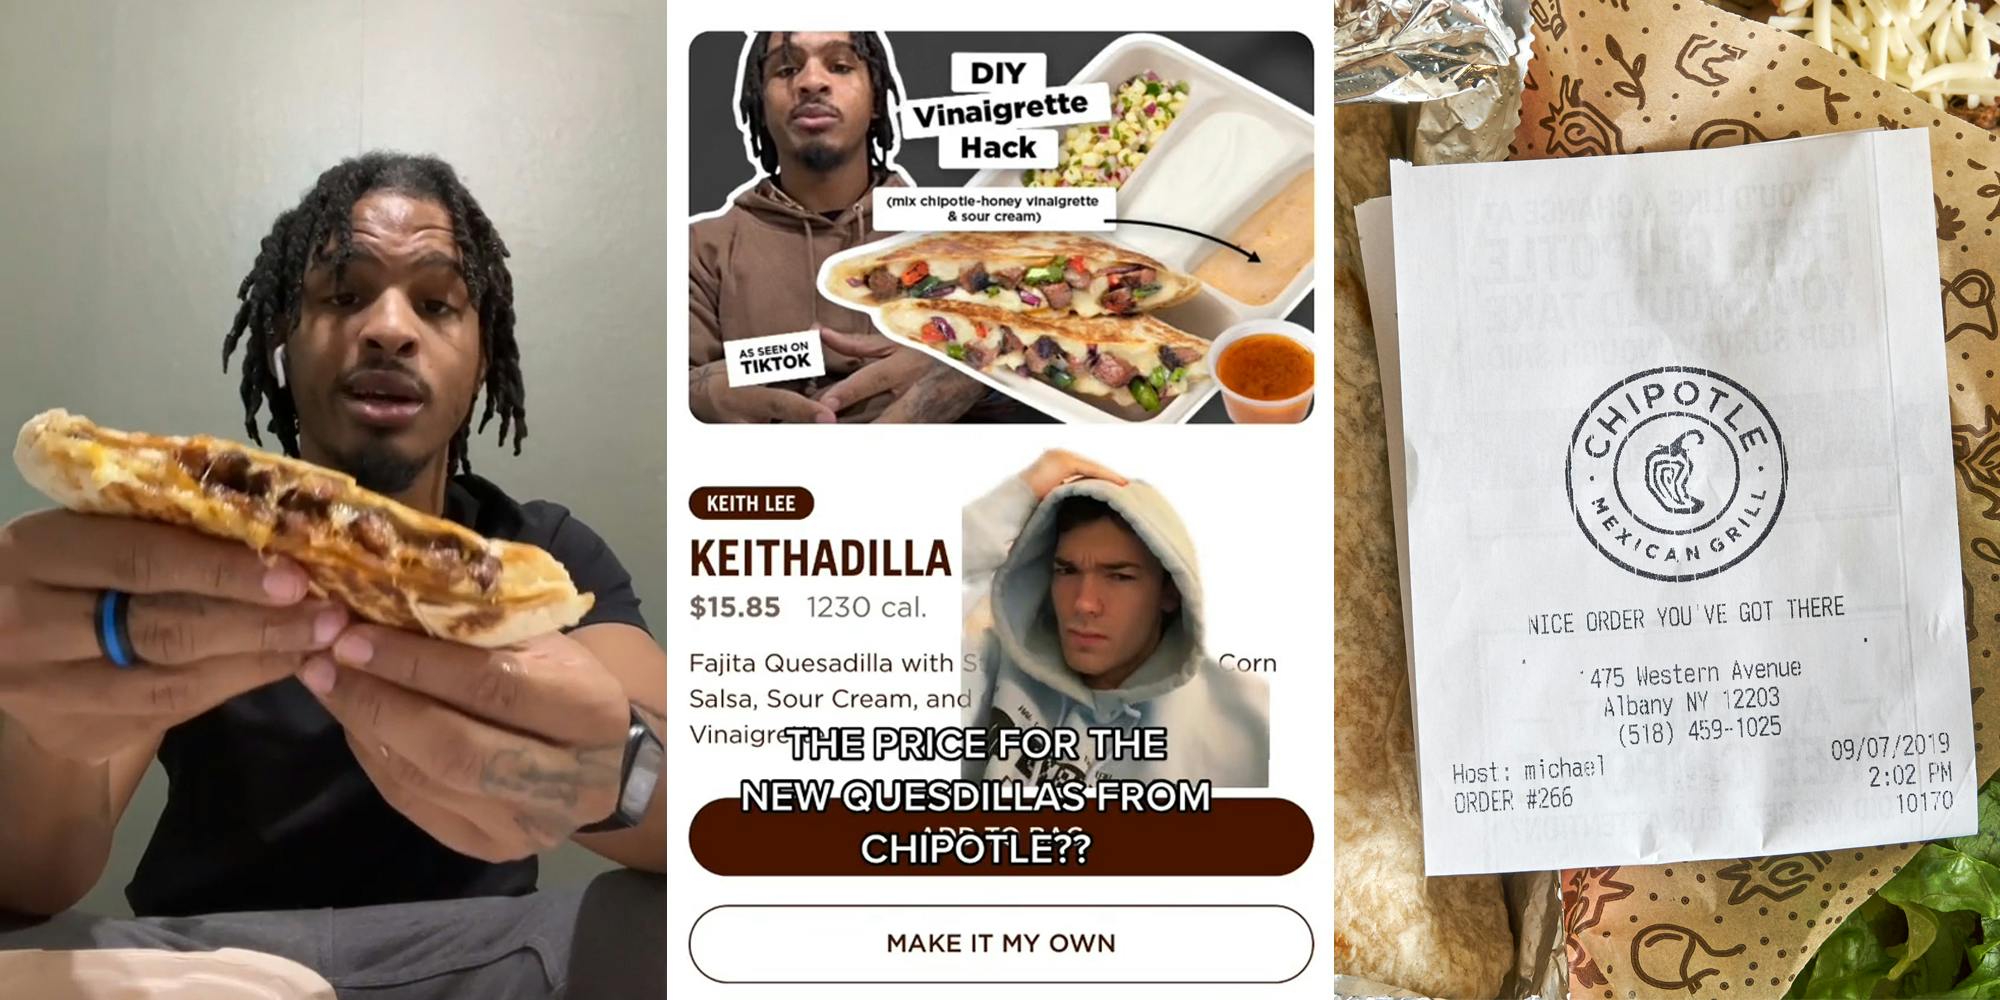 Keith Lee holding up Keithadilla (l) person greenscreen TikTok over Chipotle's Keithadilla ad with caption "THE PRICE FOR THE NEW QUESADILLAS FROM CHIPOTLE??" (c) Chipotle receipt on food (r)